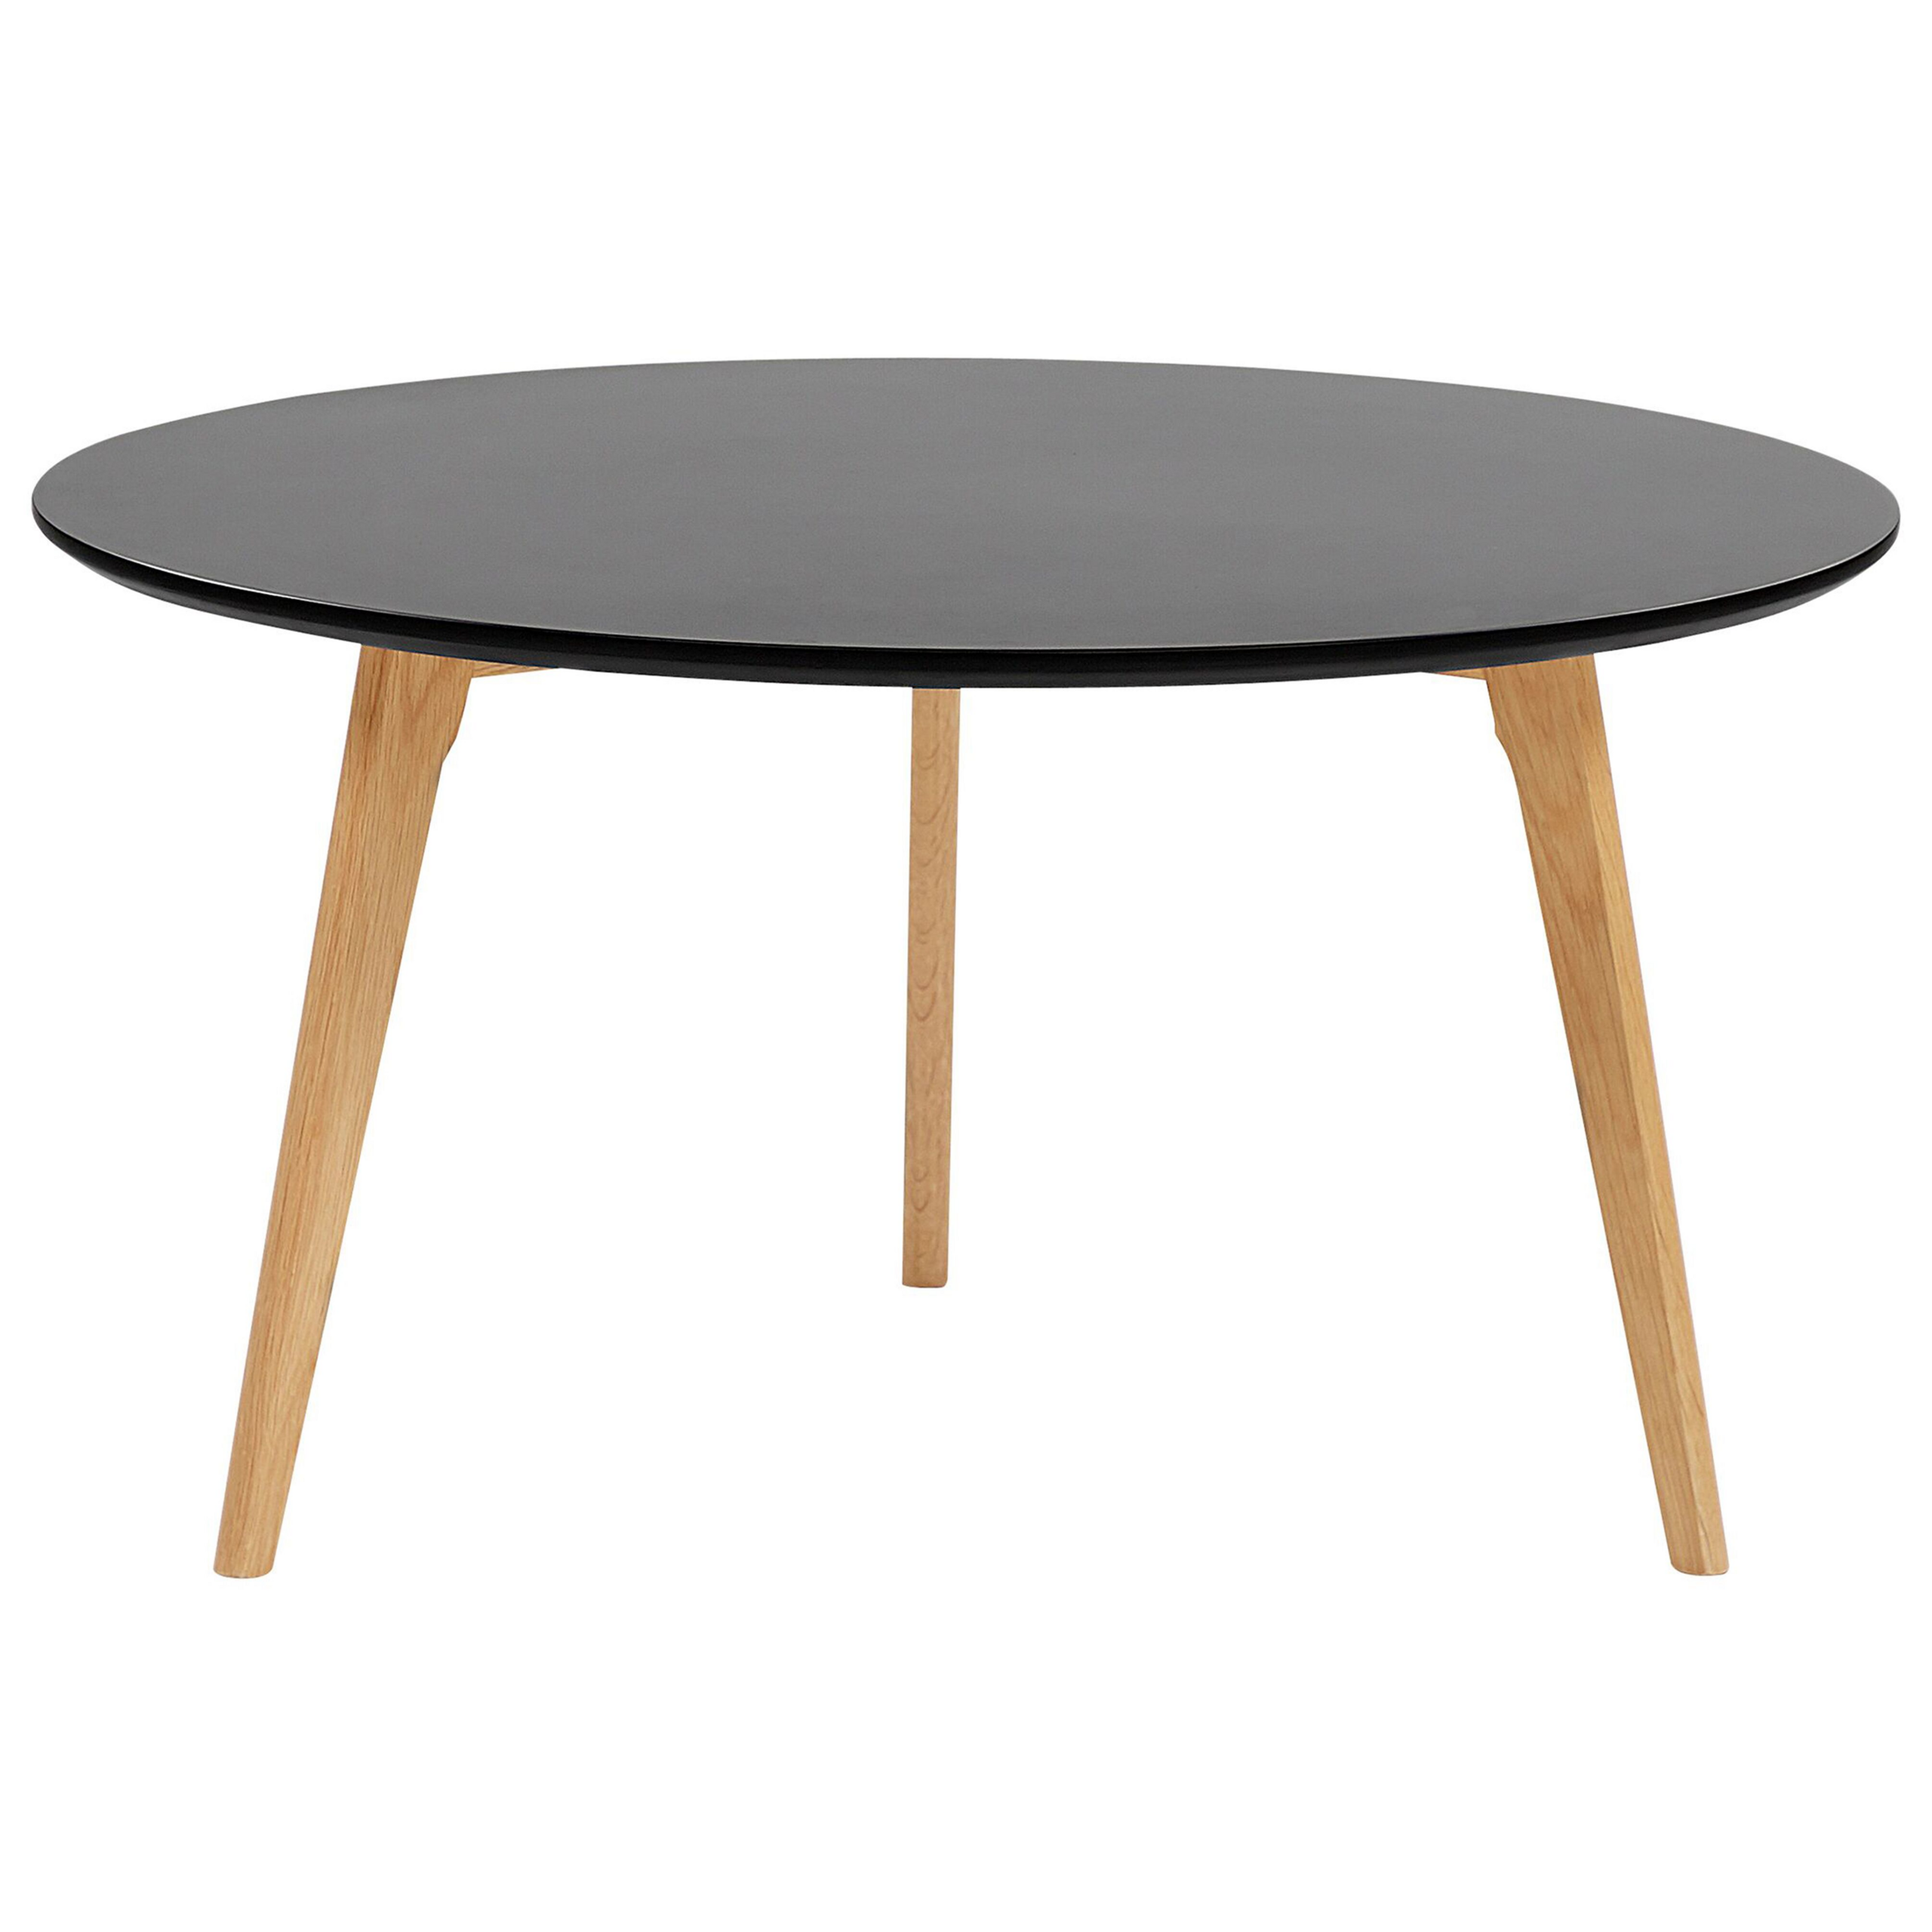 Beliani Coffee Table Black Oval Tripod Legs Solid Wood Table Top Modern Contemporary